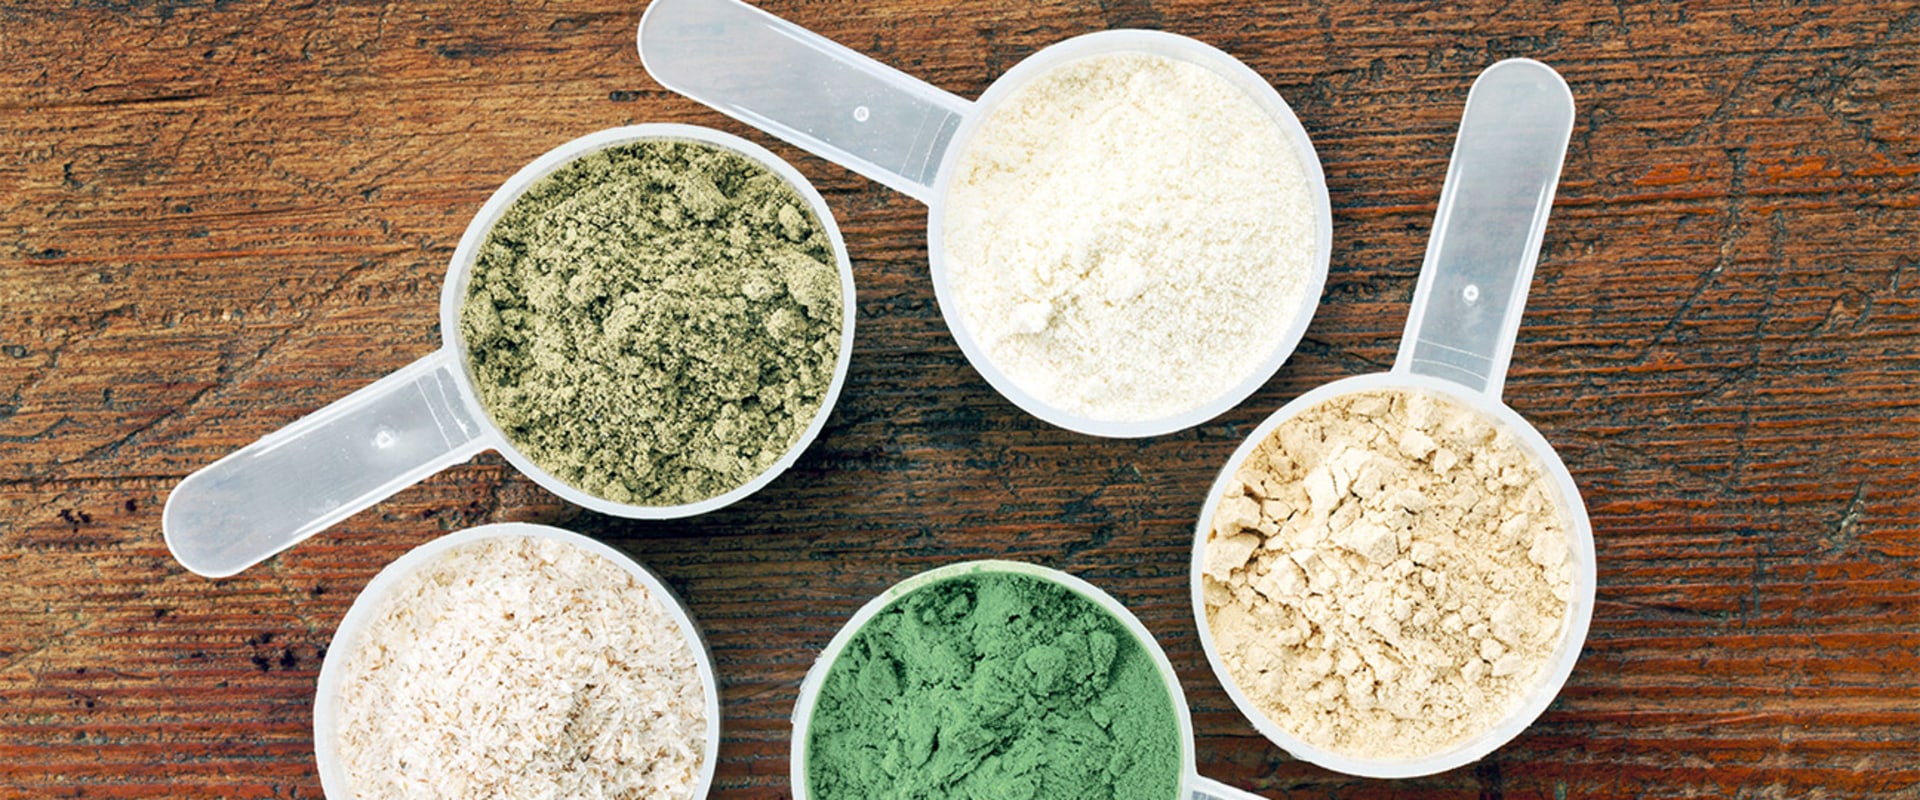 What is the best protein supplement for vegetarians?